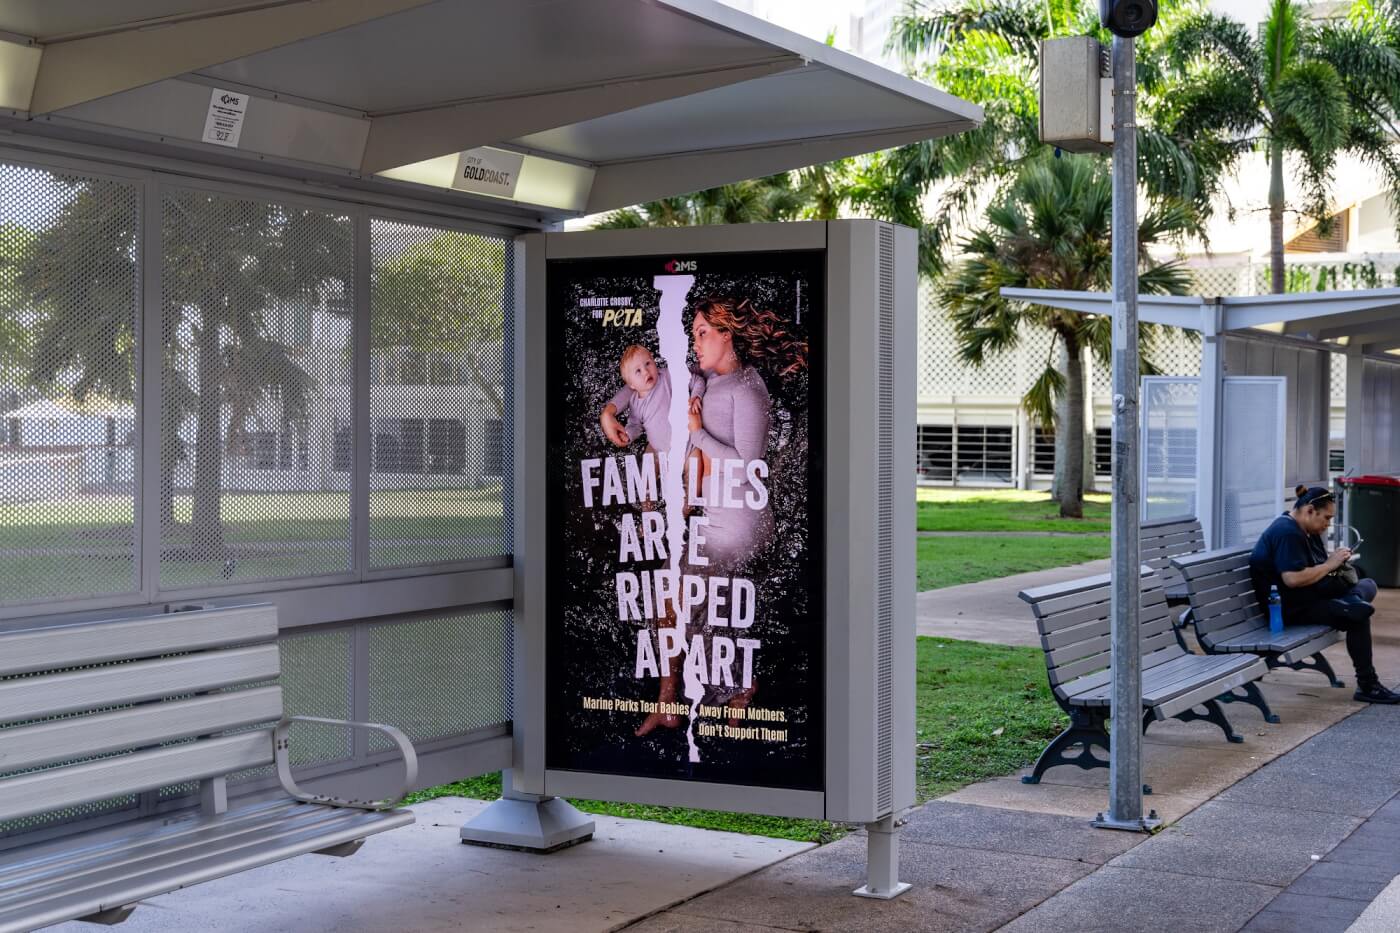 Families Ripped Apart: Anti–Marine Park Message Arrives on Seaworld Drive